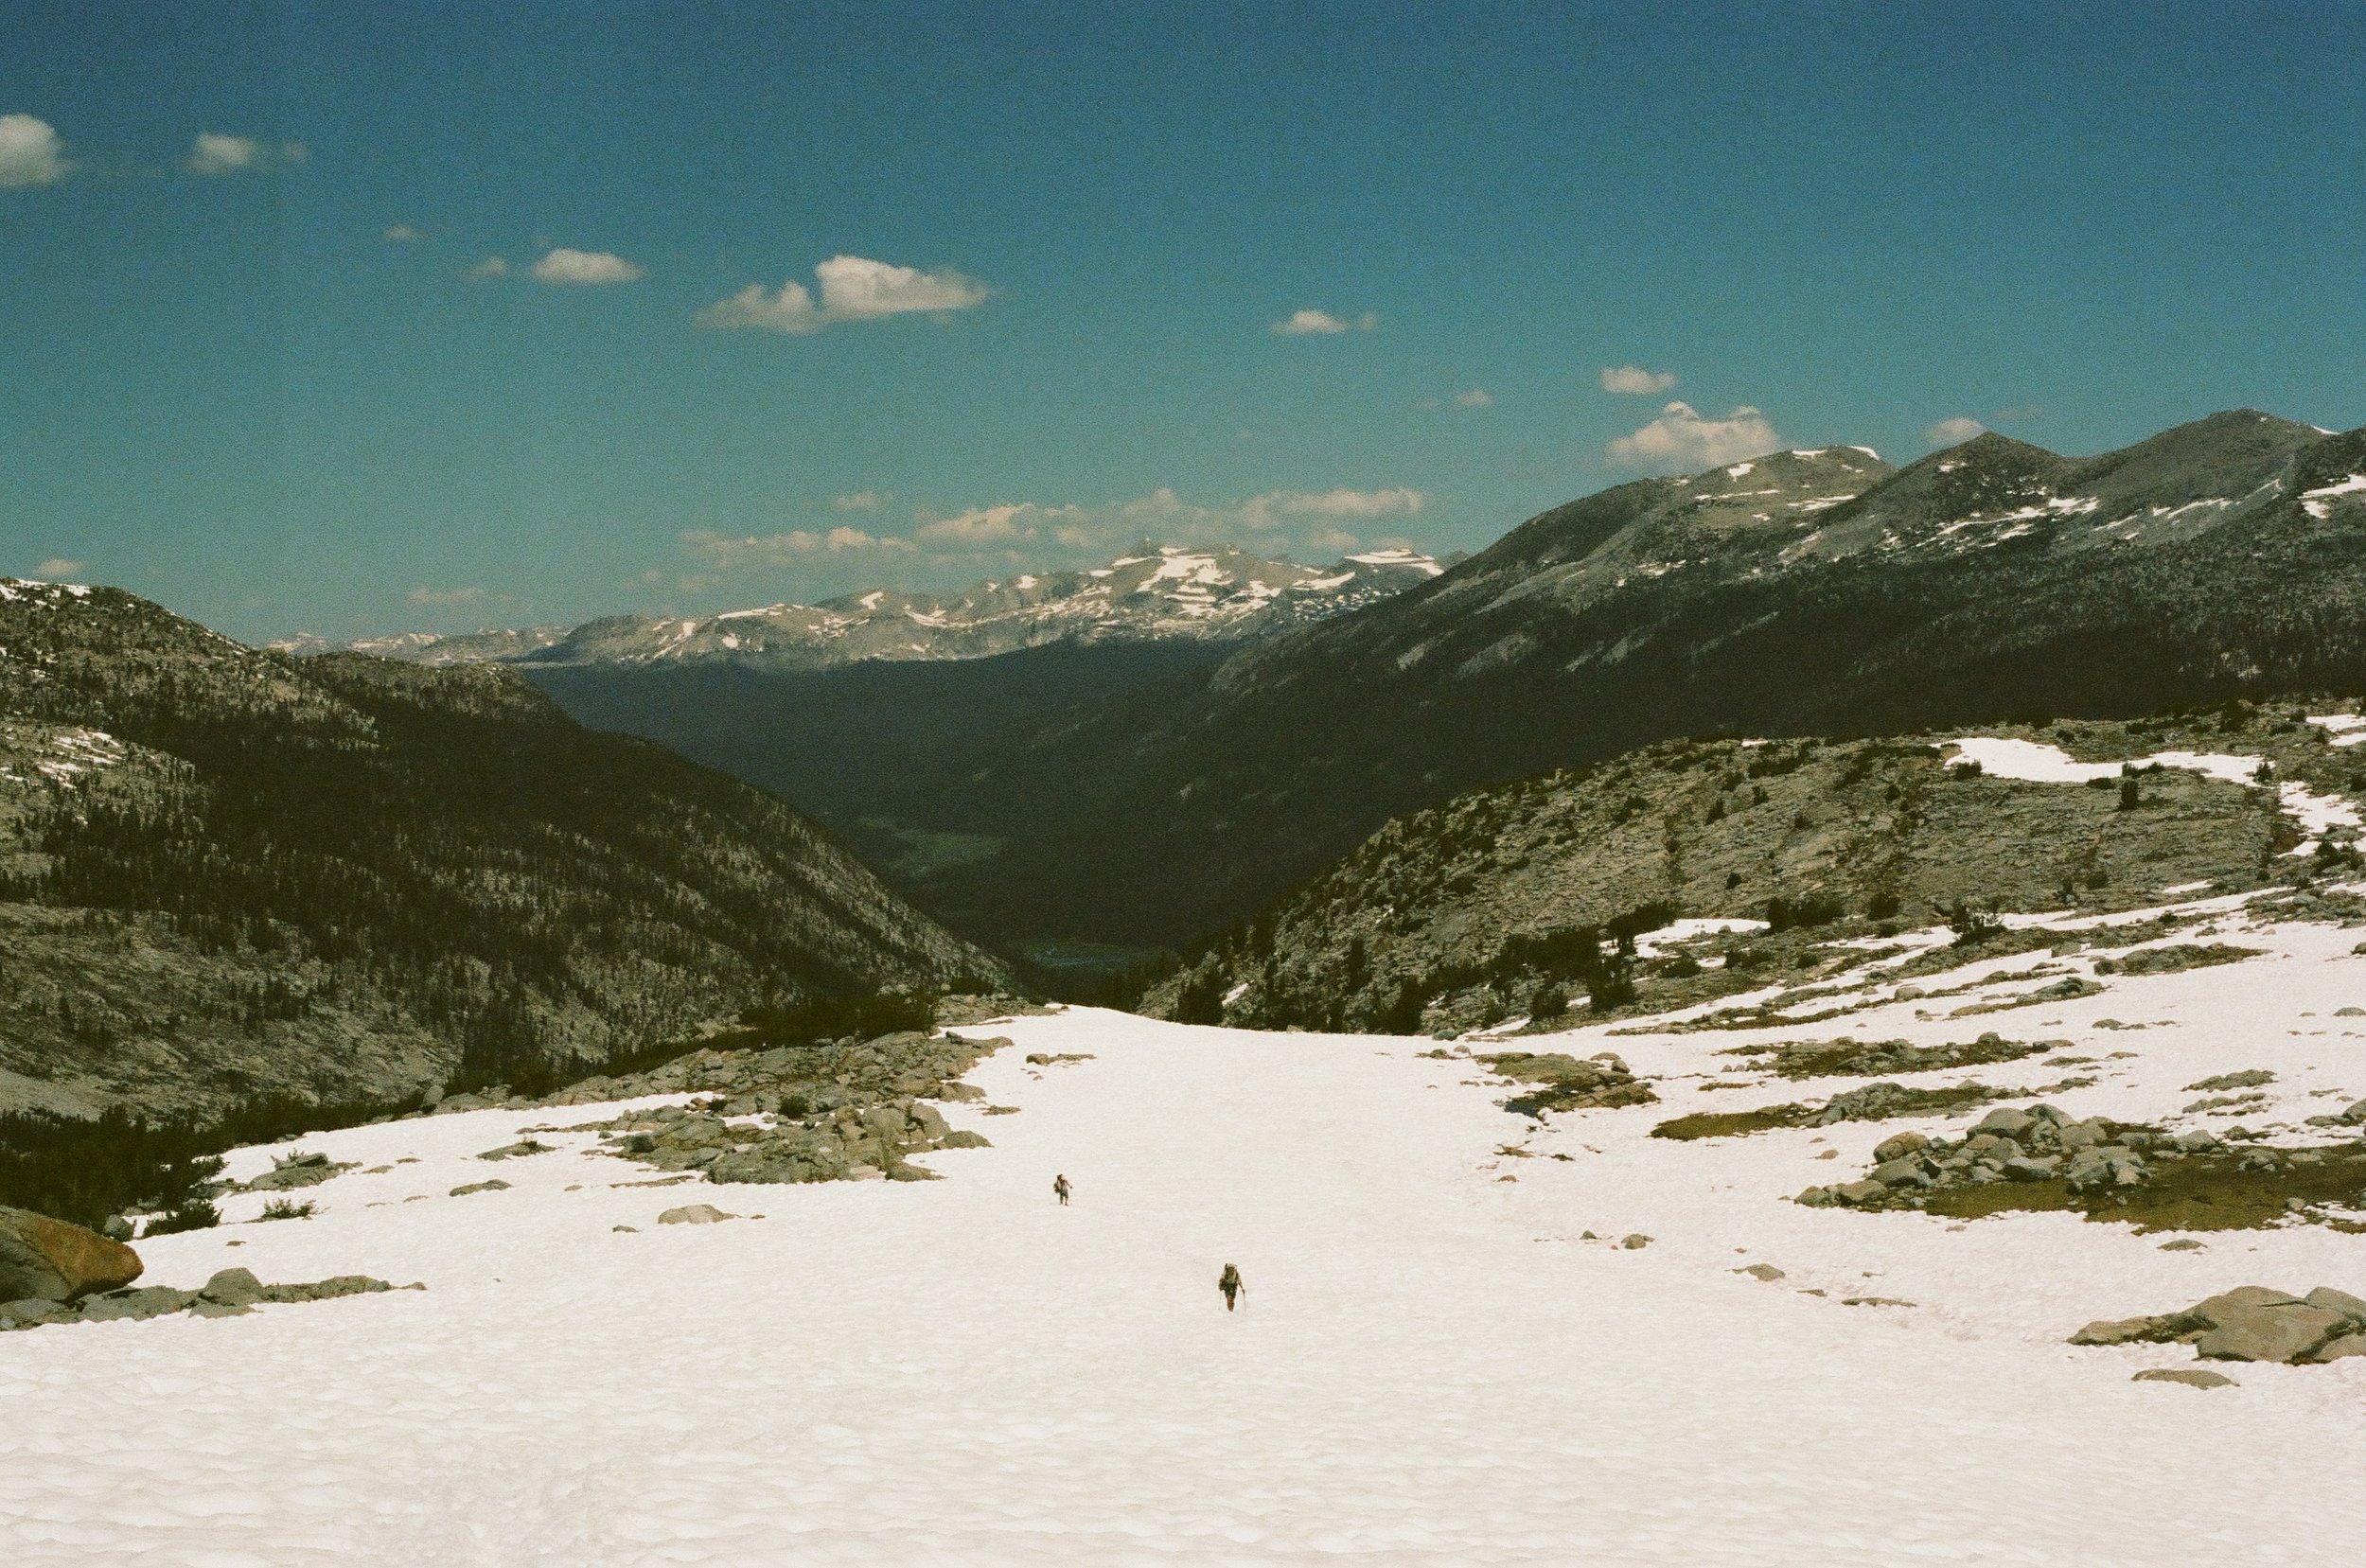  Owen and Sissy climbing up Donohue Pass, 35mm film 